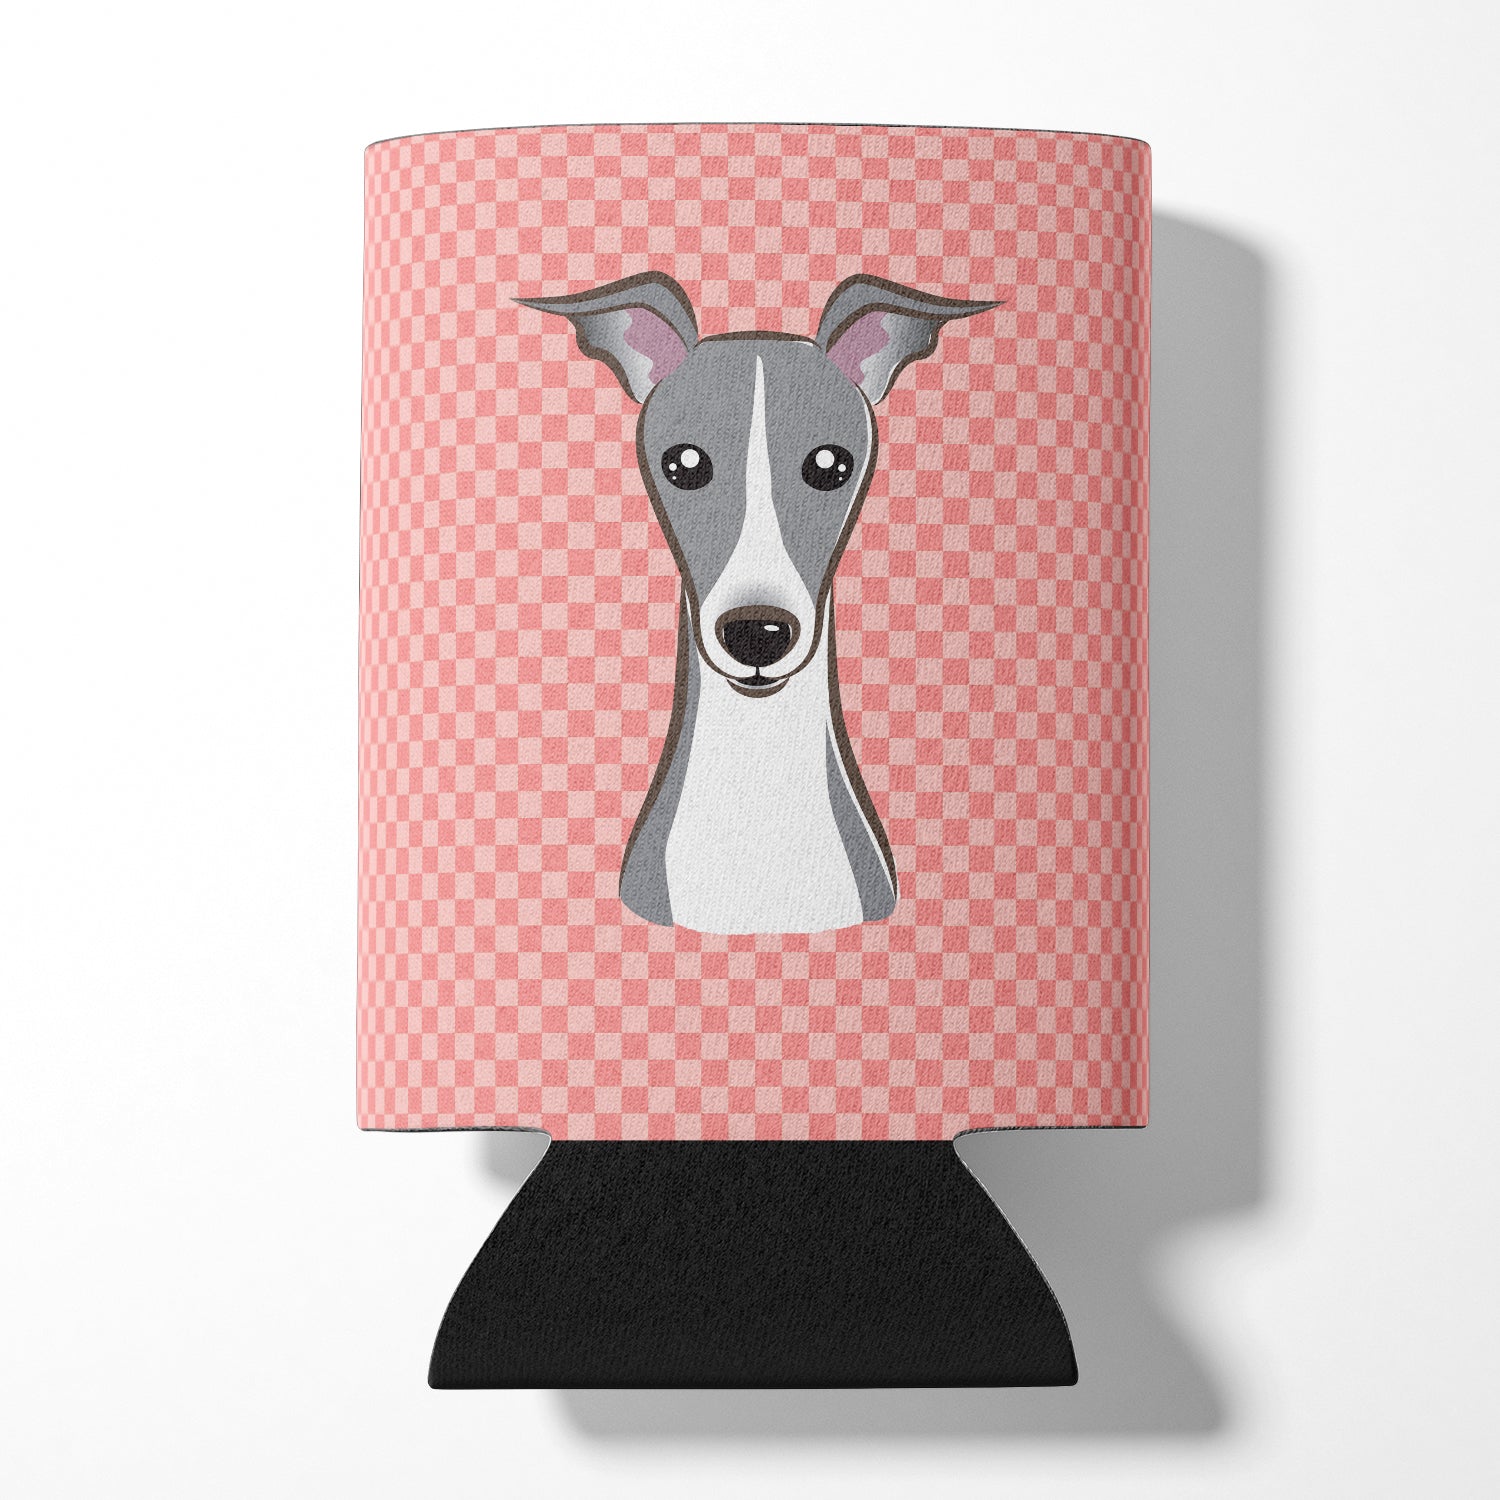 Checkerboard Pink Italian Greyhound Can or Bottle Hugger BB1236CC